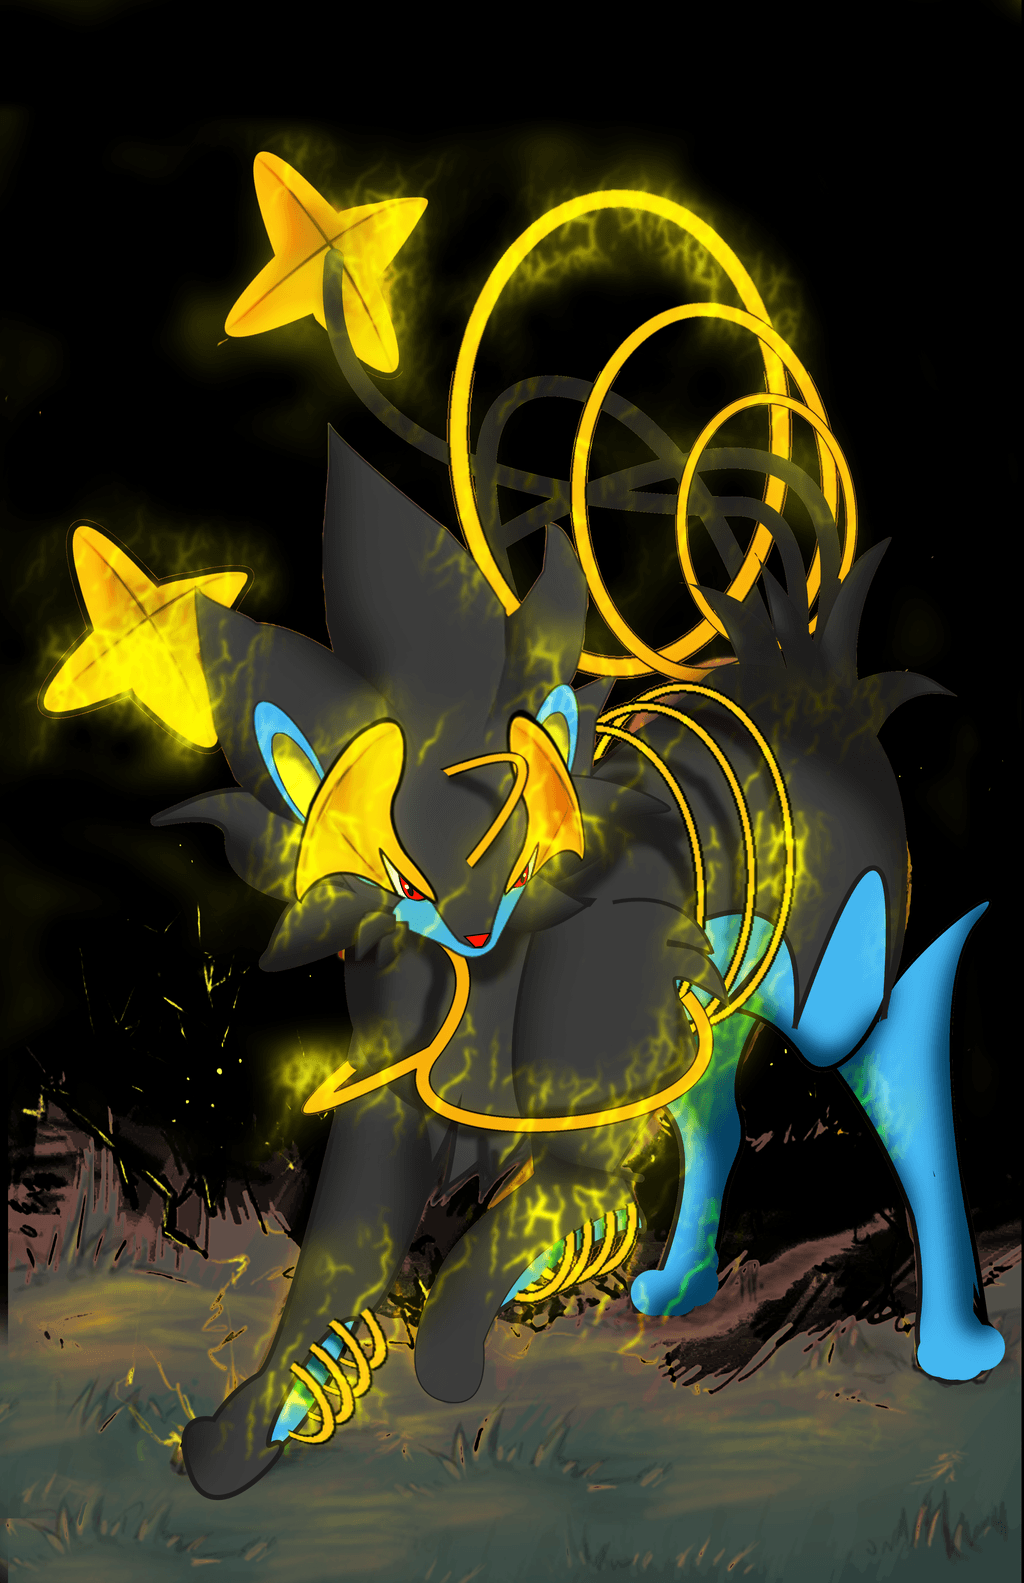 Luxray Pokemon Wallpapers Hd Images | Pokemon Images